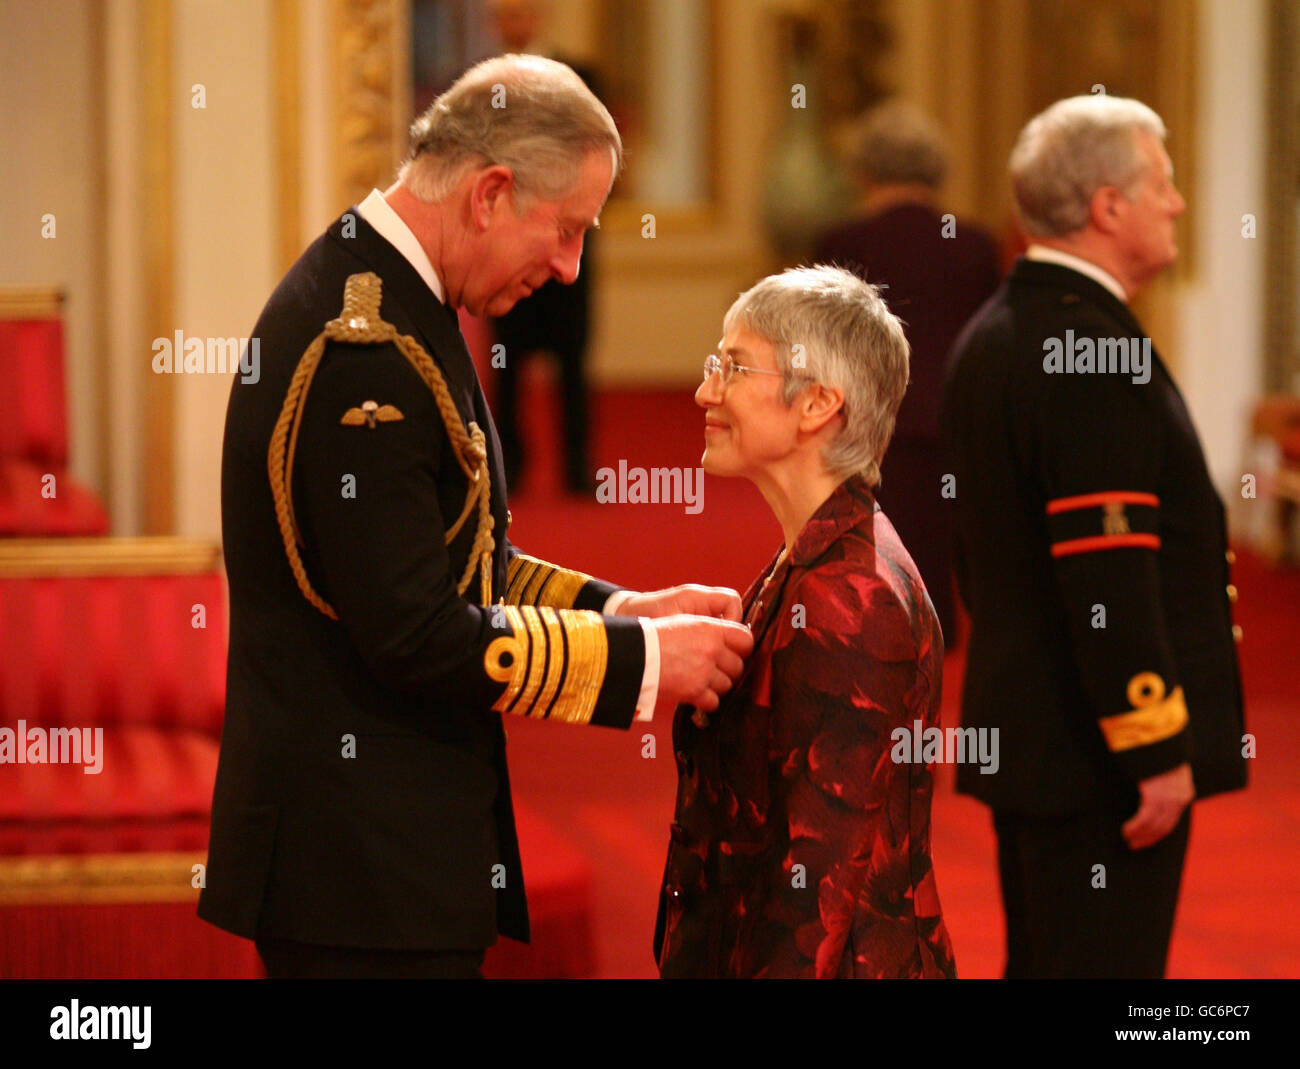 Director of sport at the University of Birmingham and chair of England Squash, Zena Wooldridge, from Stourbridge, is made an OBE by the Prince of Wales for services to sport, inside the Ballroom at Buckingham Palace in central London. Stock Photo